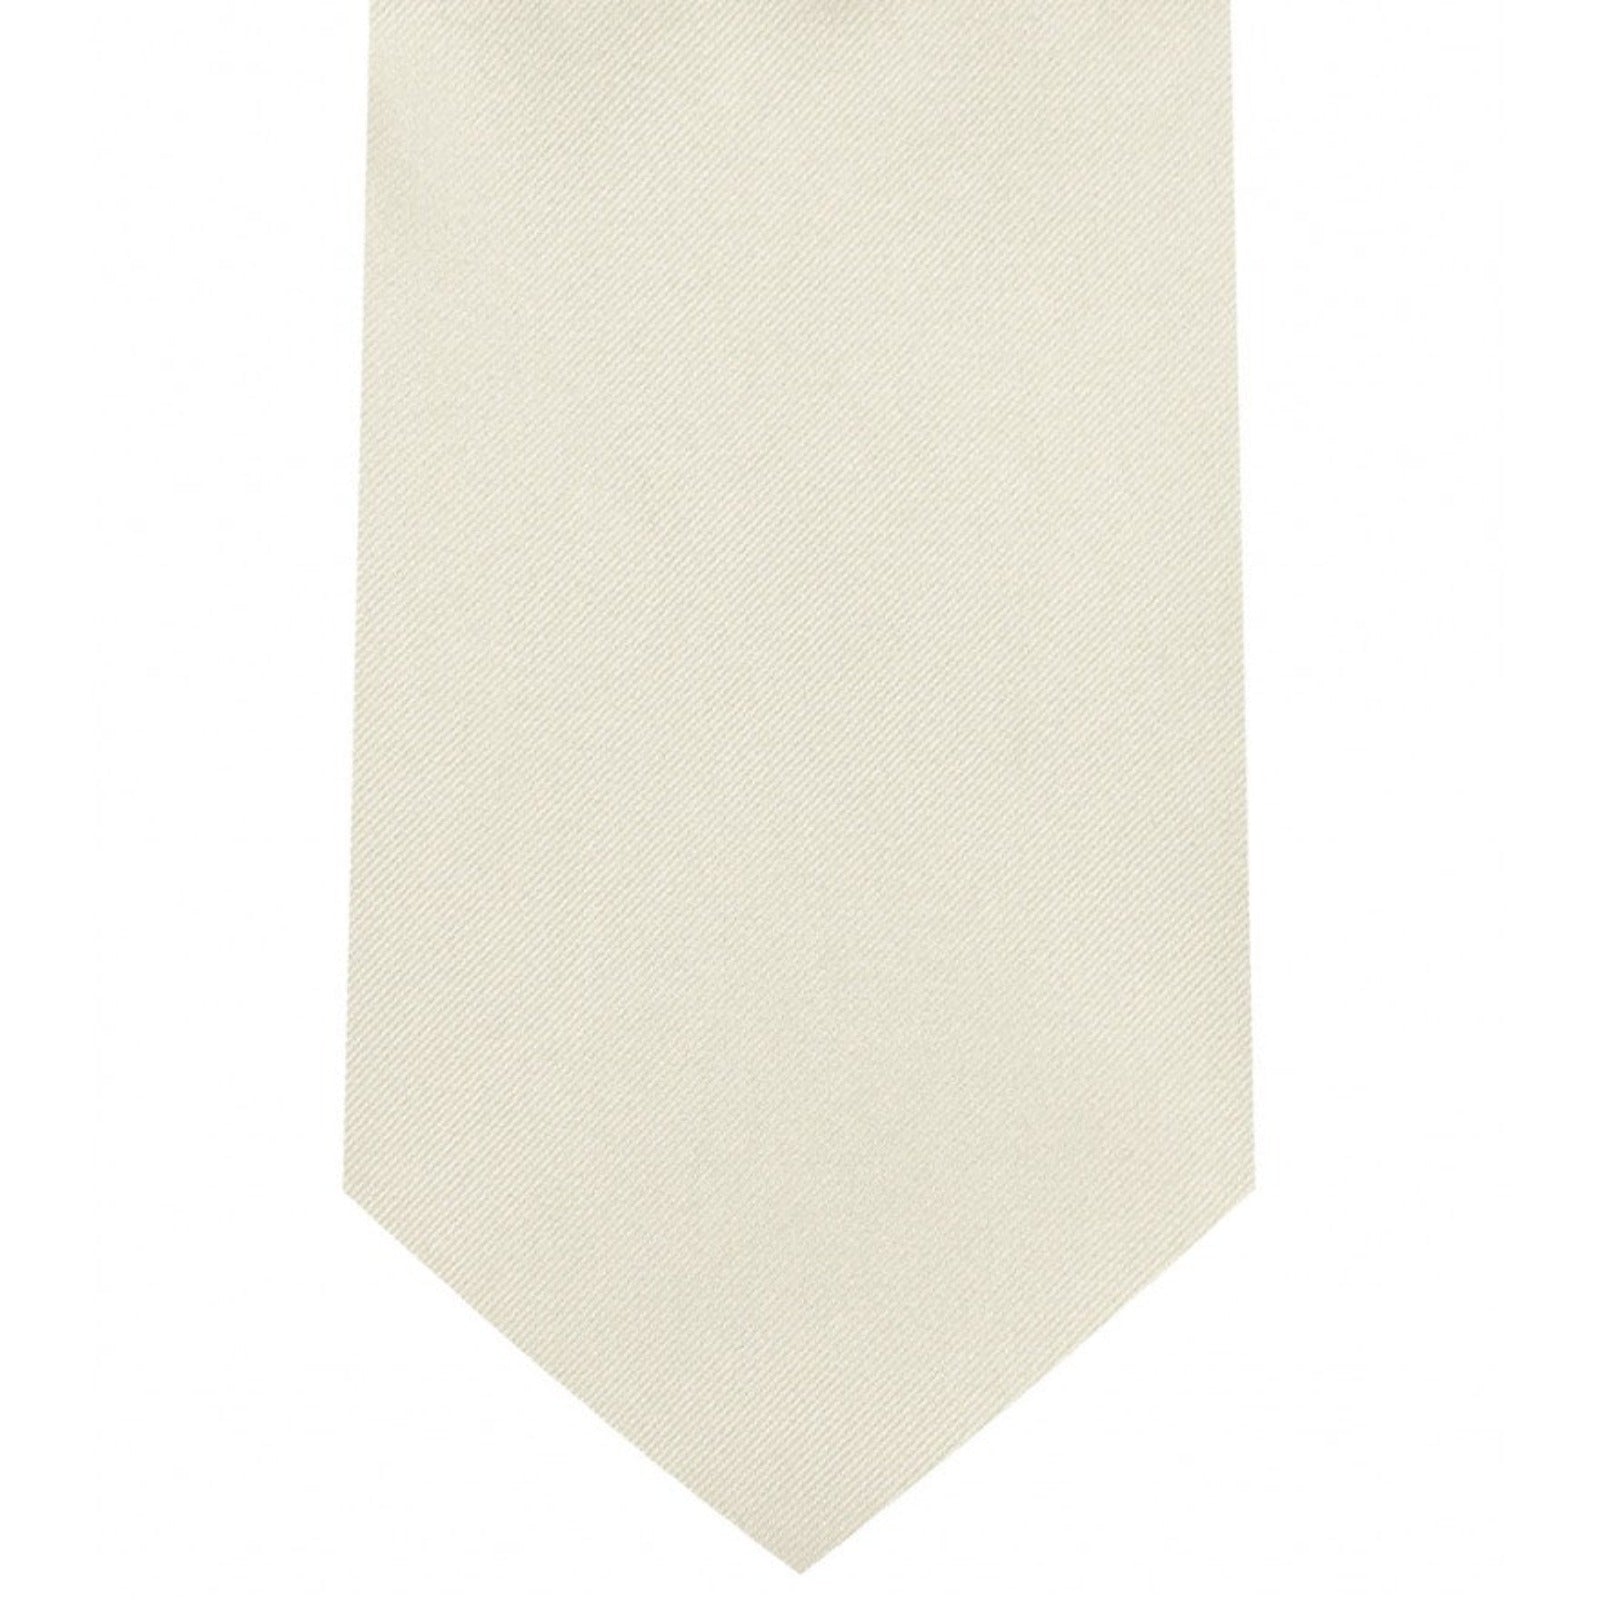 Classic Ivory Tie Regular width 3.5 inches With Matching Pocket Square | KCT Menswear